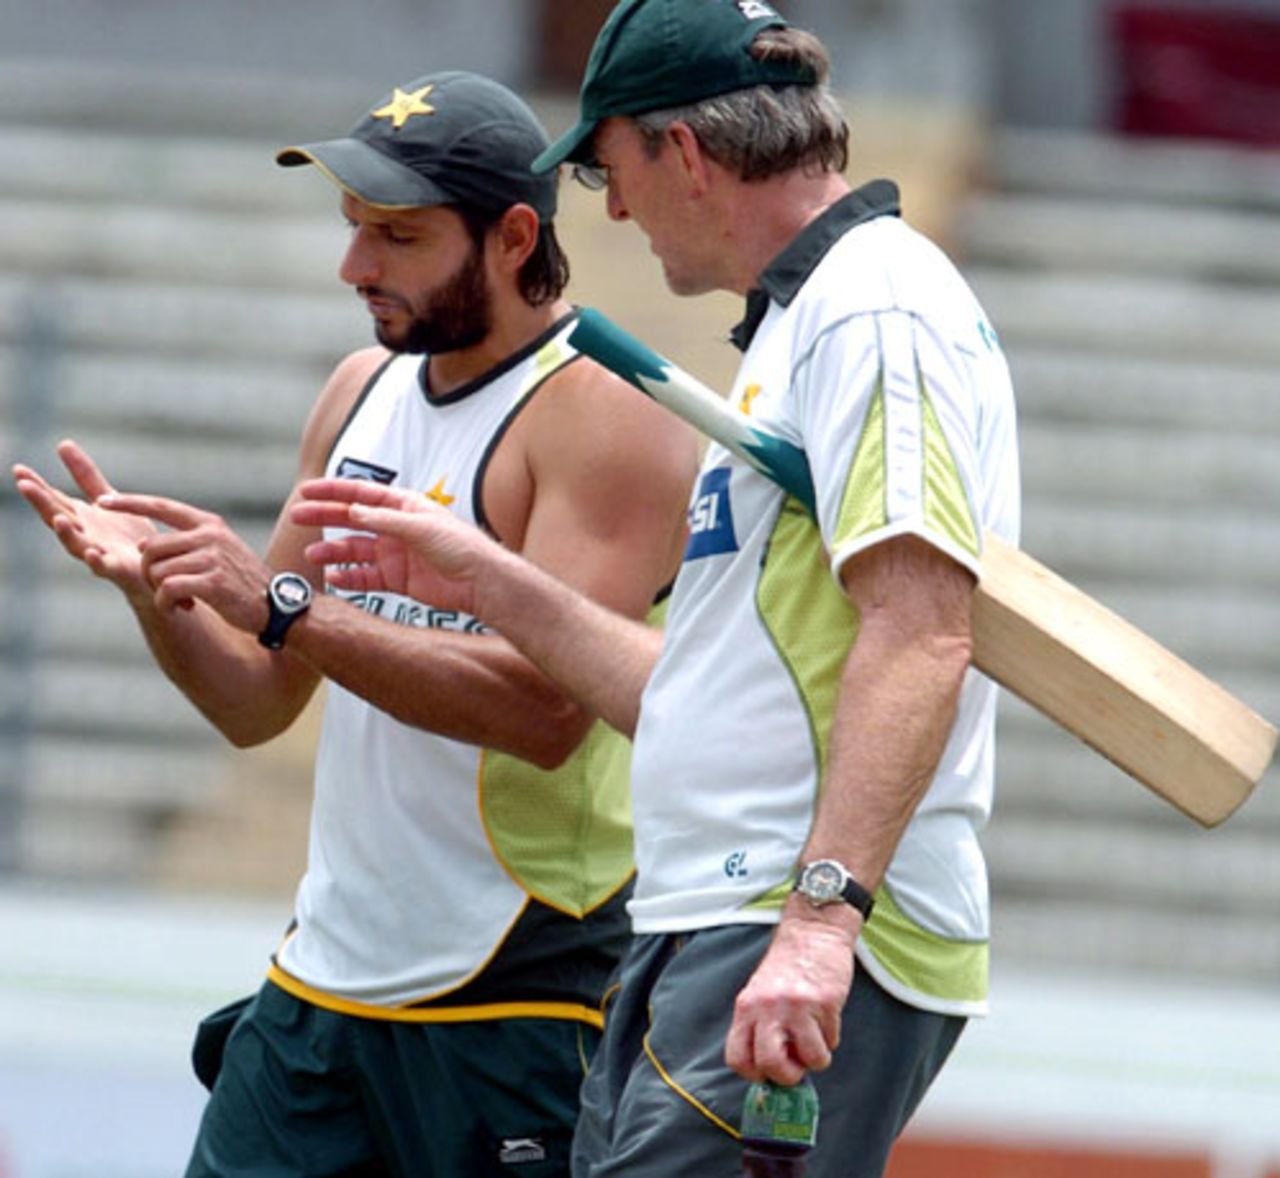 Let's see your future: Geoff Lawson has a close look at Shahid Afridi's hand, Mirpur, June 13, 2008